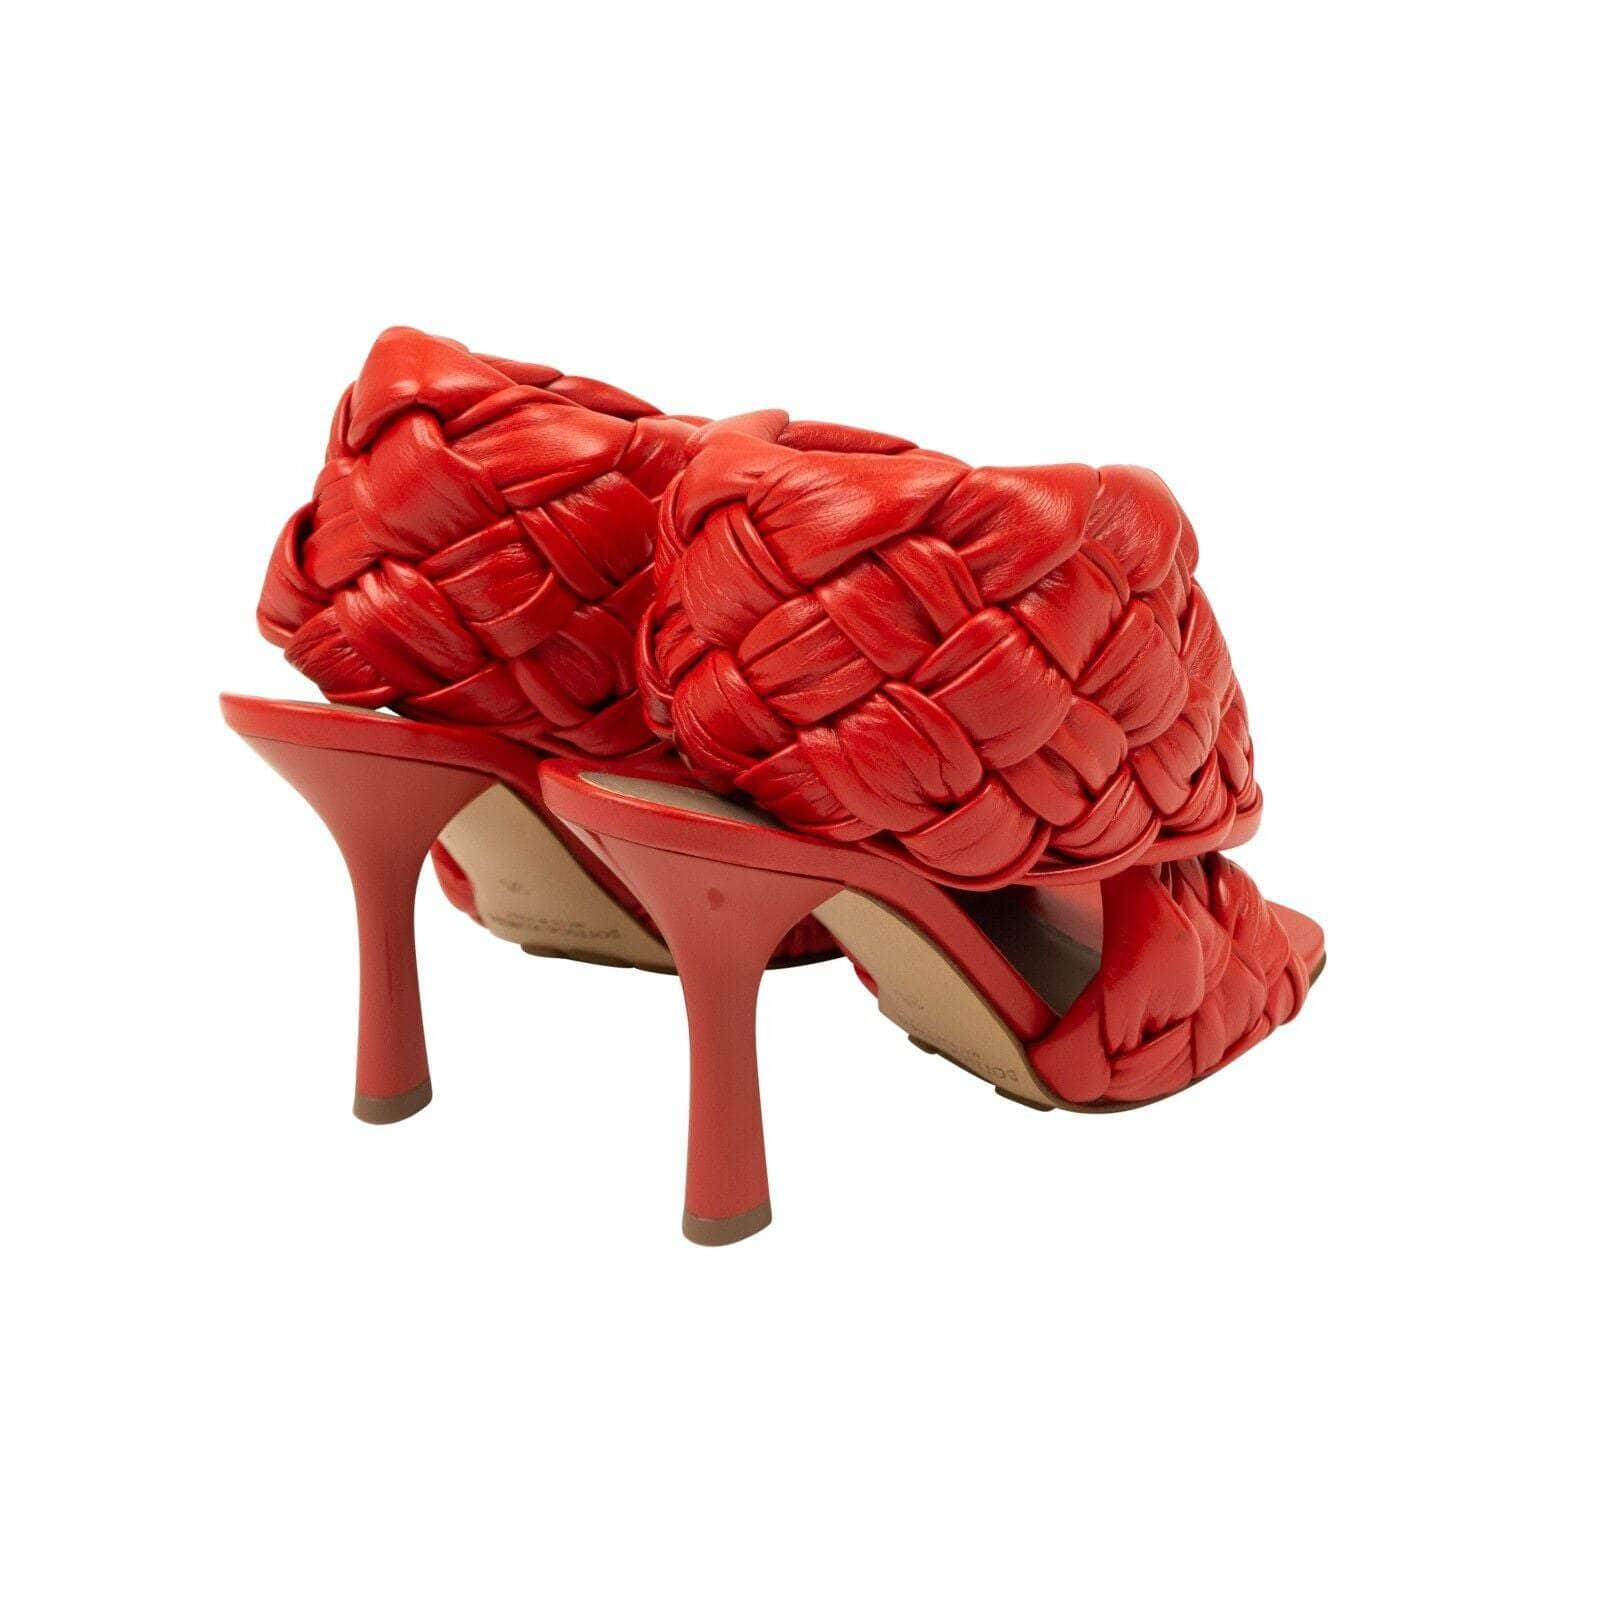 Bottega Veneta 1000-2000, bvc1, channelenable-all, chicmi, couponcollection, gender-womens, main-shoes, size-37, size-37-5, womens-pumps-heels Red Leather The Board Heeled Sandals